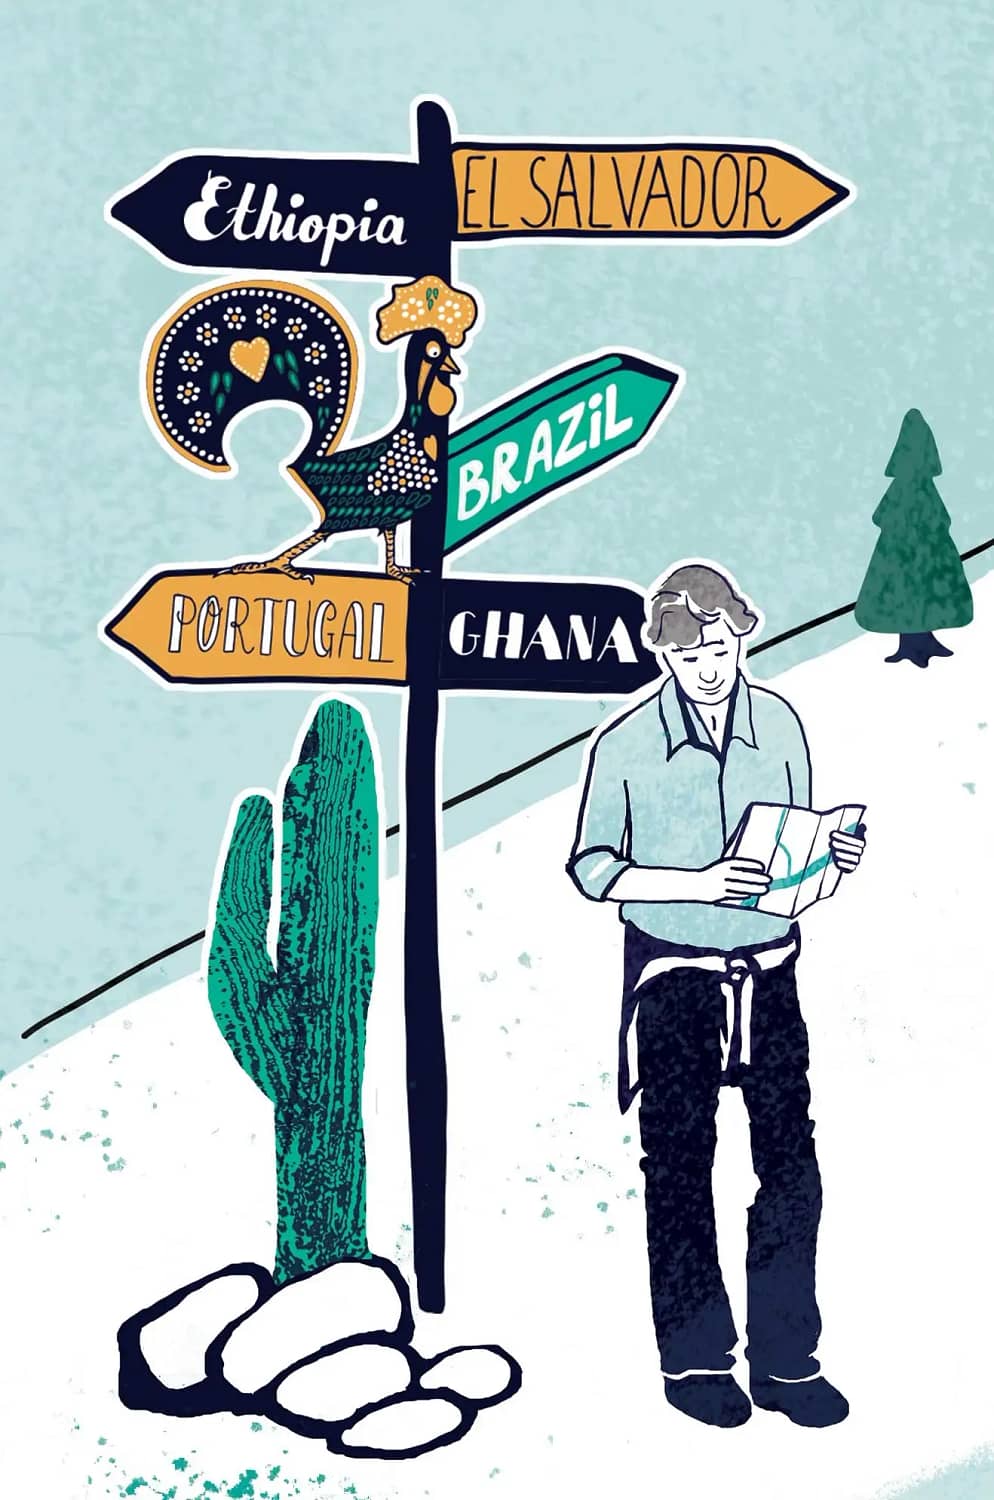 Life-map-portrait-illustration-showing-man-reading-map-while-cockrel-overlooking-from-handlettered-signpost-illustration-by-Kati-Lacey-freelance-illustrator